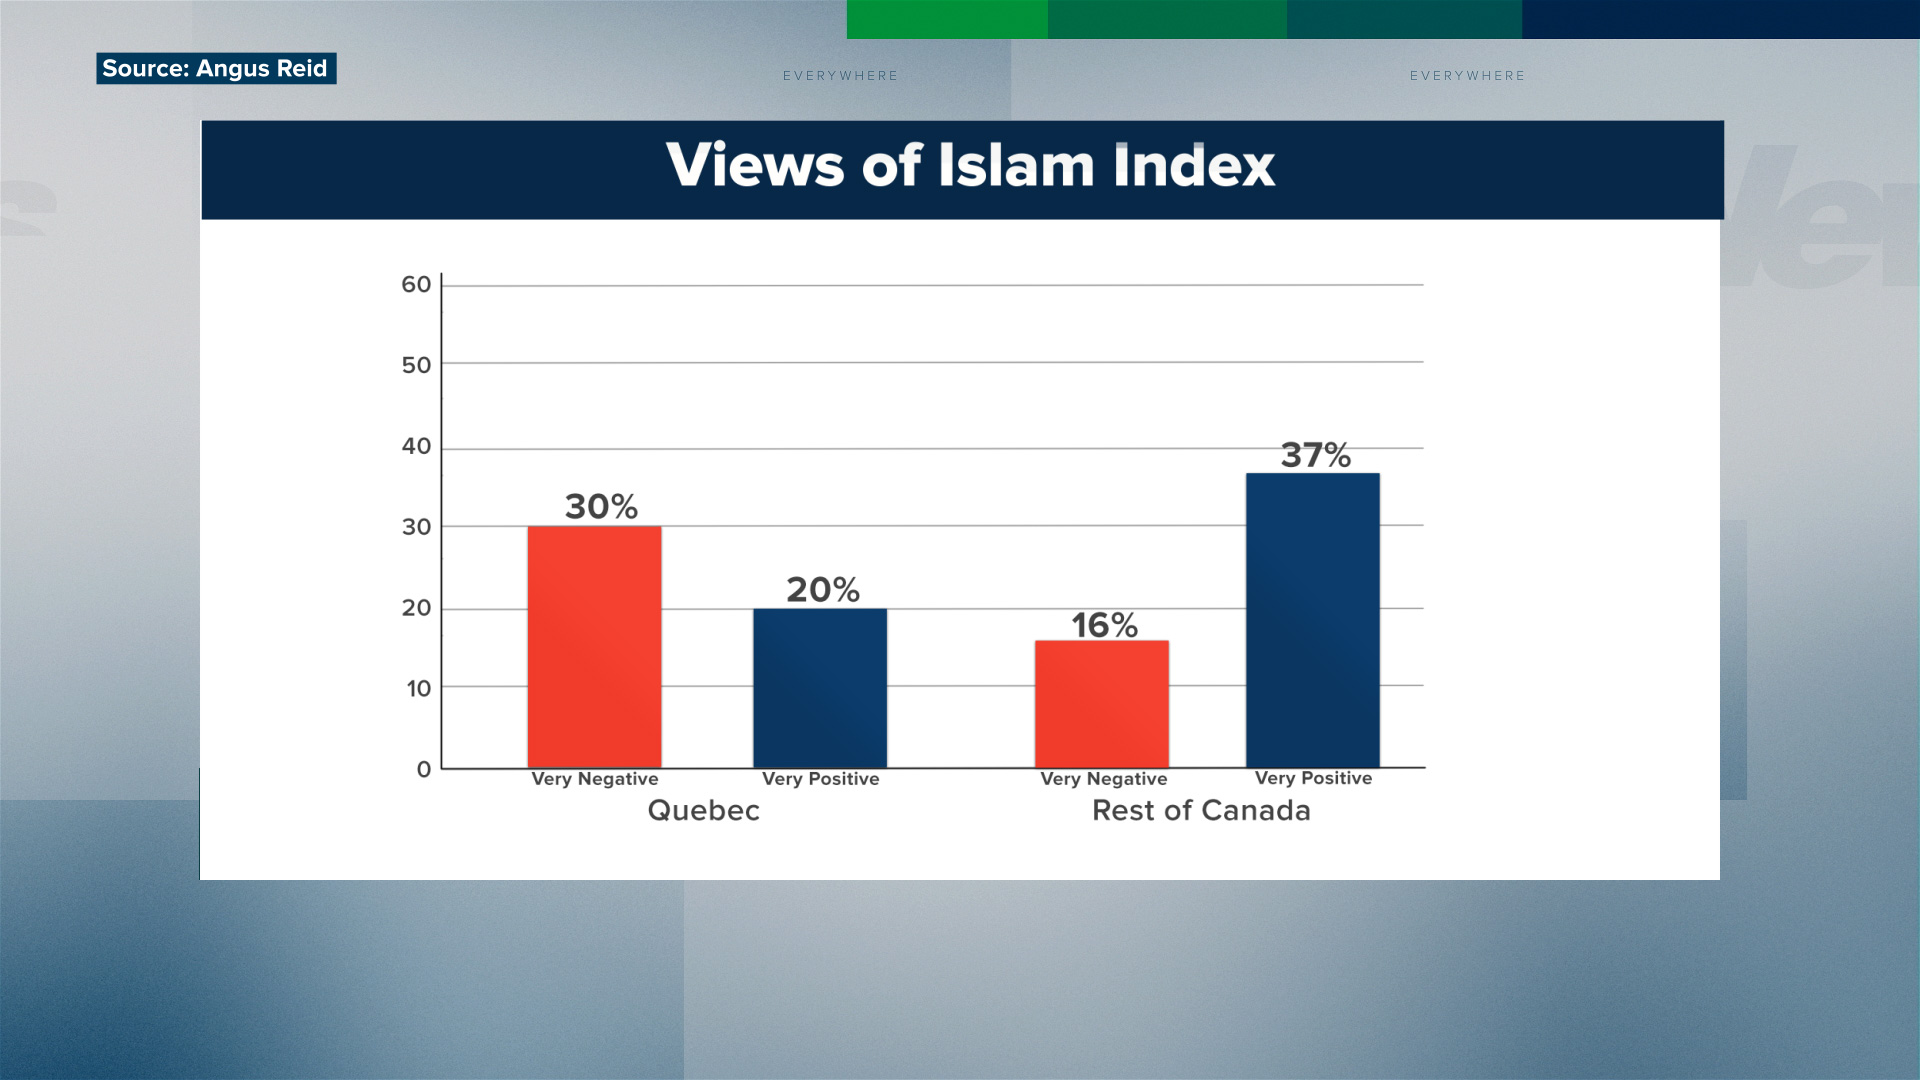 Views of Islam in Canada according to Angus Reid Survey conducted in February 2023